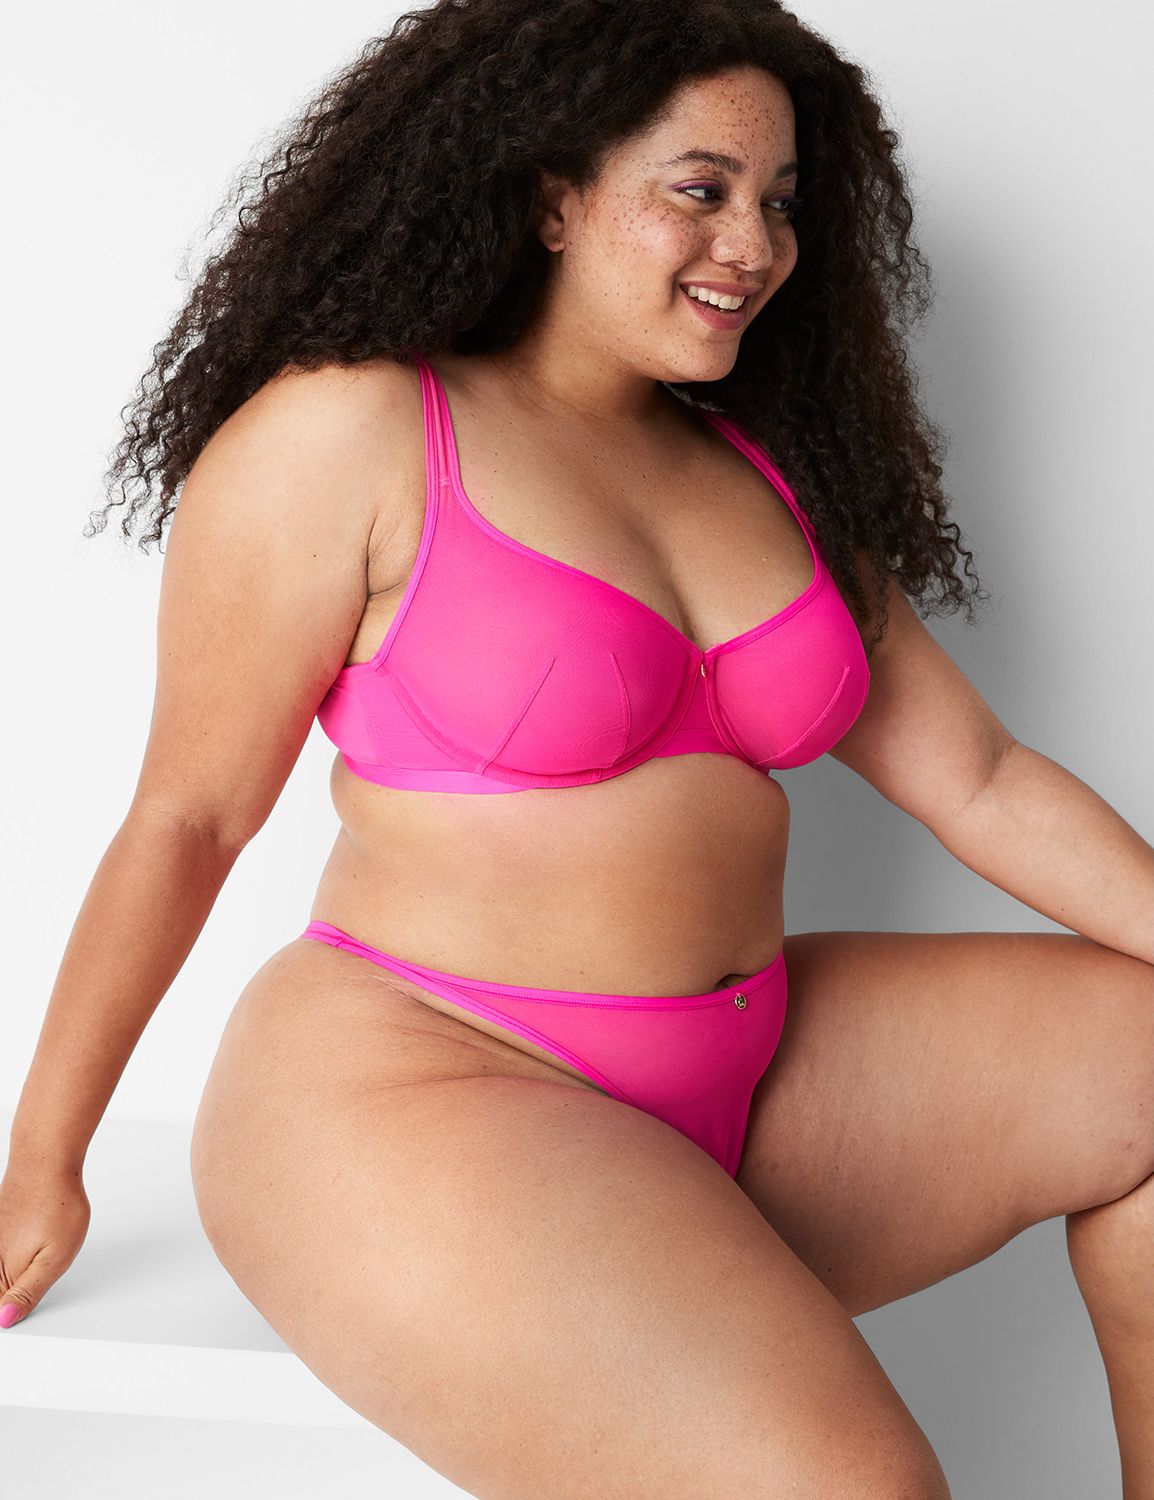 The Seriously Sexy Cacique Collection Unlined Balconette Size 36DDD Pink